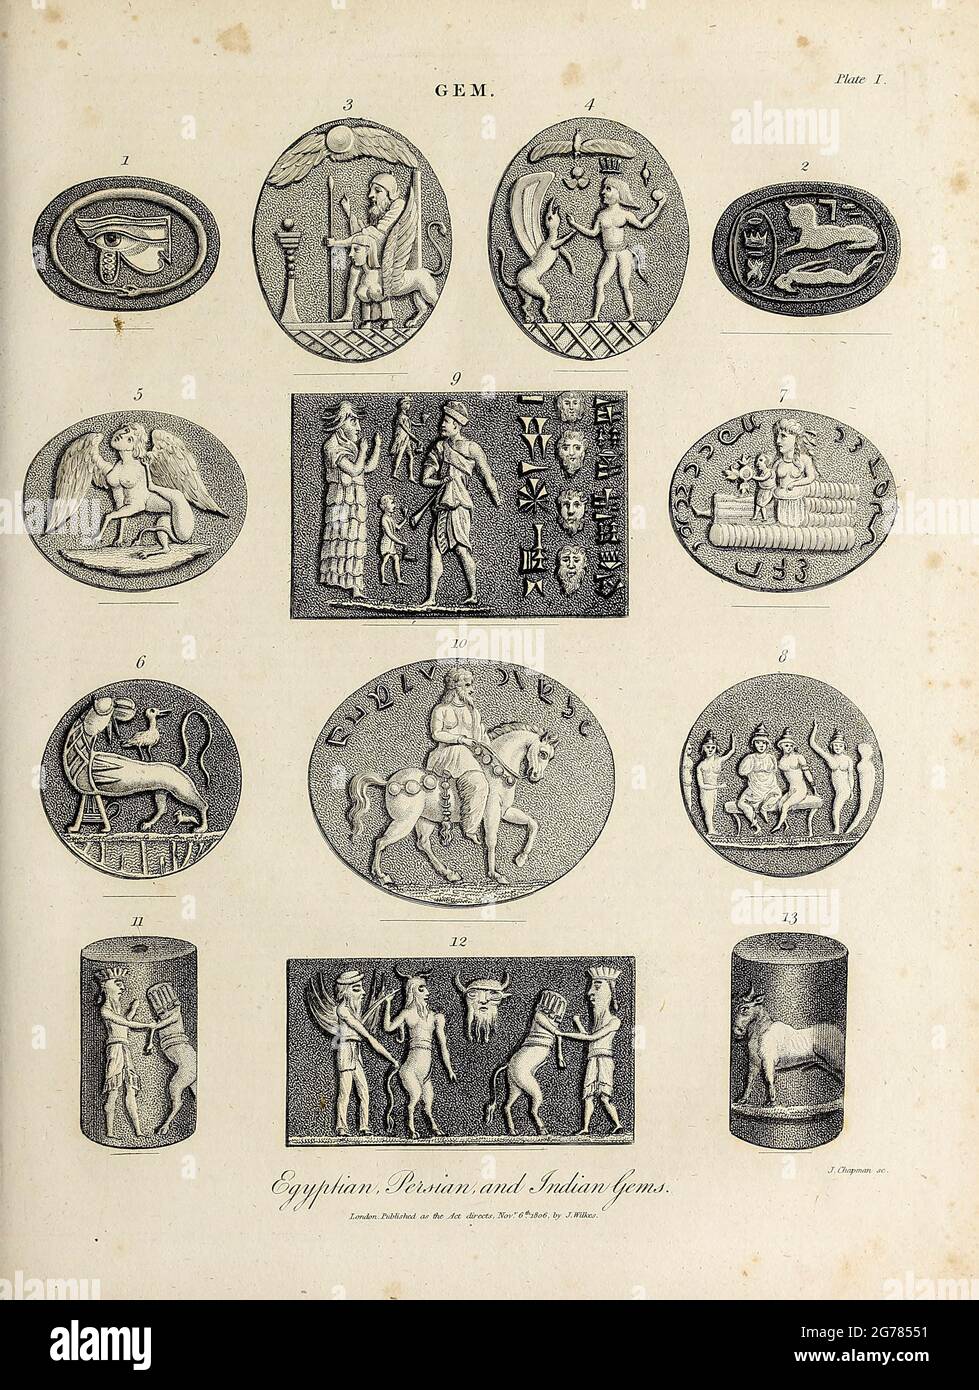 Egyptian, Indian and Persian Gems. Gem - Art highly prized for its beauty or perfection Copperplate engraving From the Encyclopaedia Londinensis or, Universal dictionary of arts, sciences, and literature; Volume VIII;  Edited by Wilkes, John. Published in London in 1810. Stock Photo